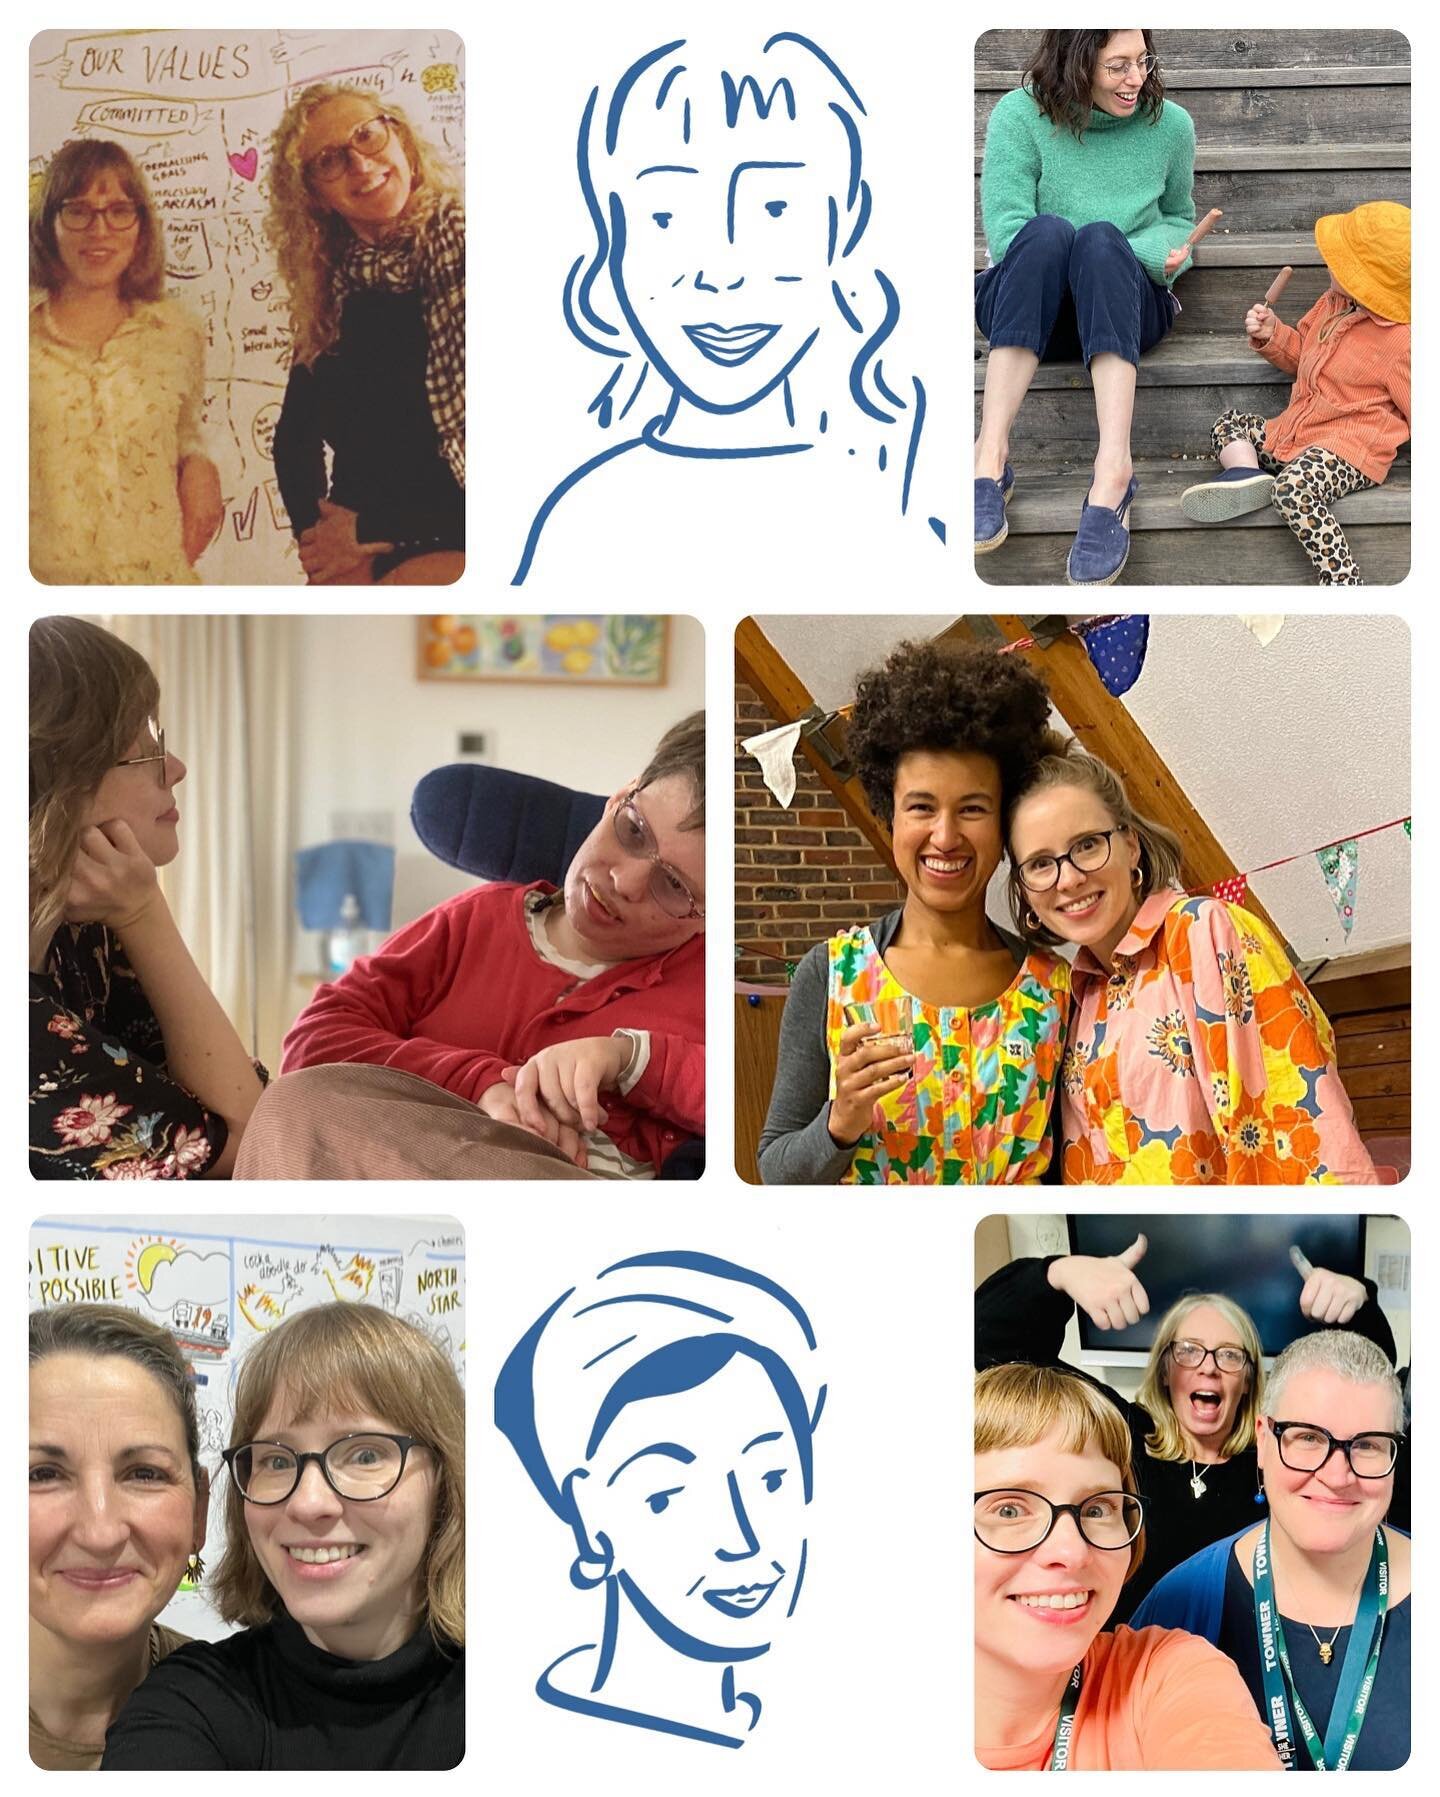 Celebrating some of the wonderful women who I&rsquo;ve been honoured to work with, women who inspire me and make life sing! Too many to mention but here are just a few. 

Top to bottom, L-R

Slide 1

Claire Cordell, Charity Leader and director @eggto